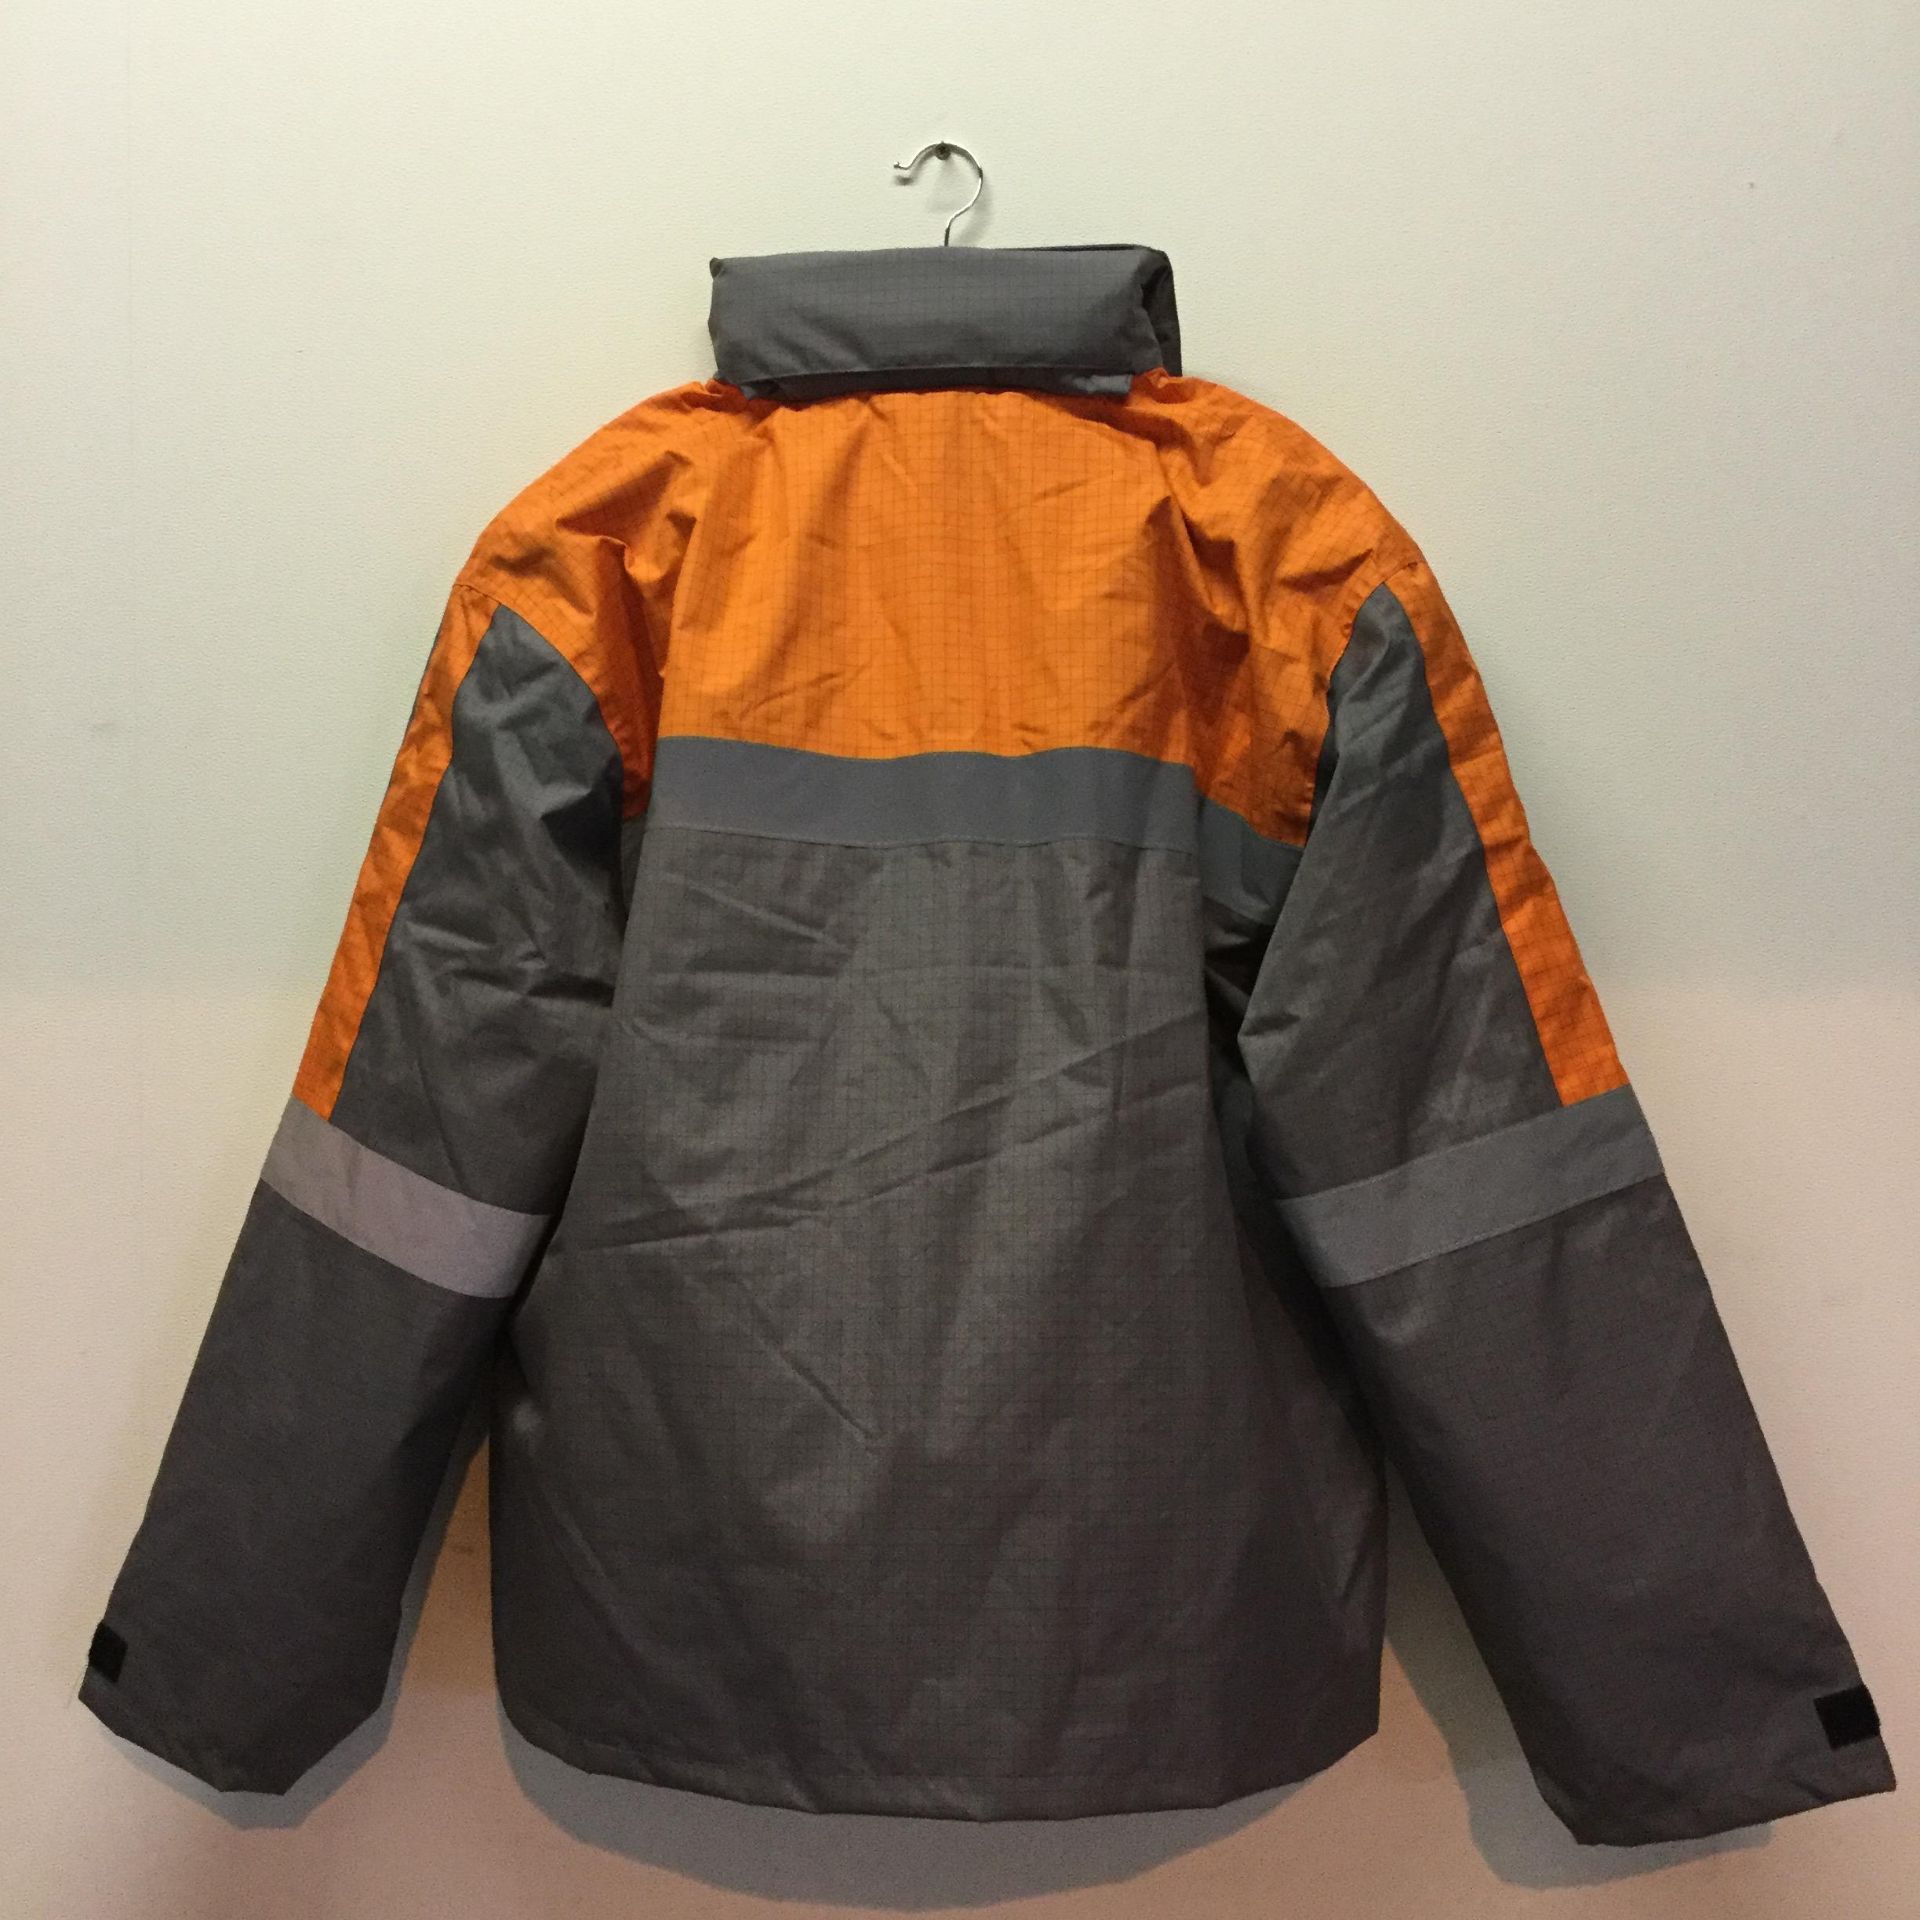 All Weather 3 layer Gortex Antistatic waterproof Jackets - Size 58 - Image 2 of 2